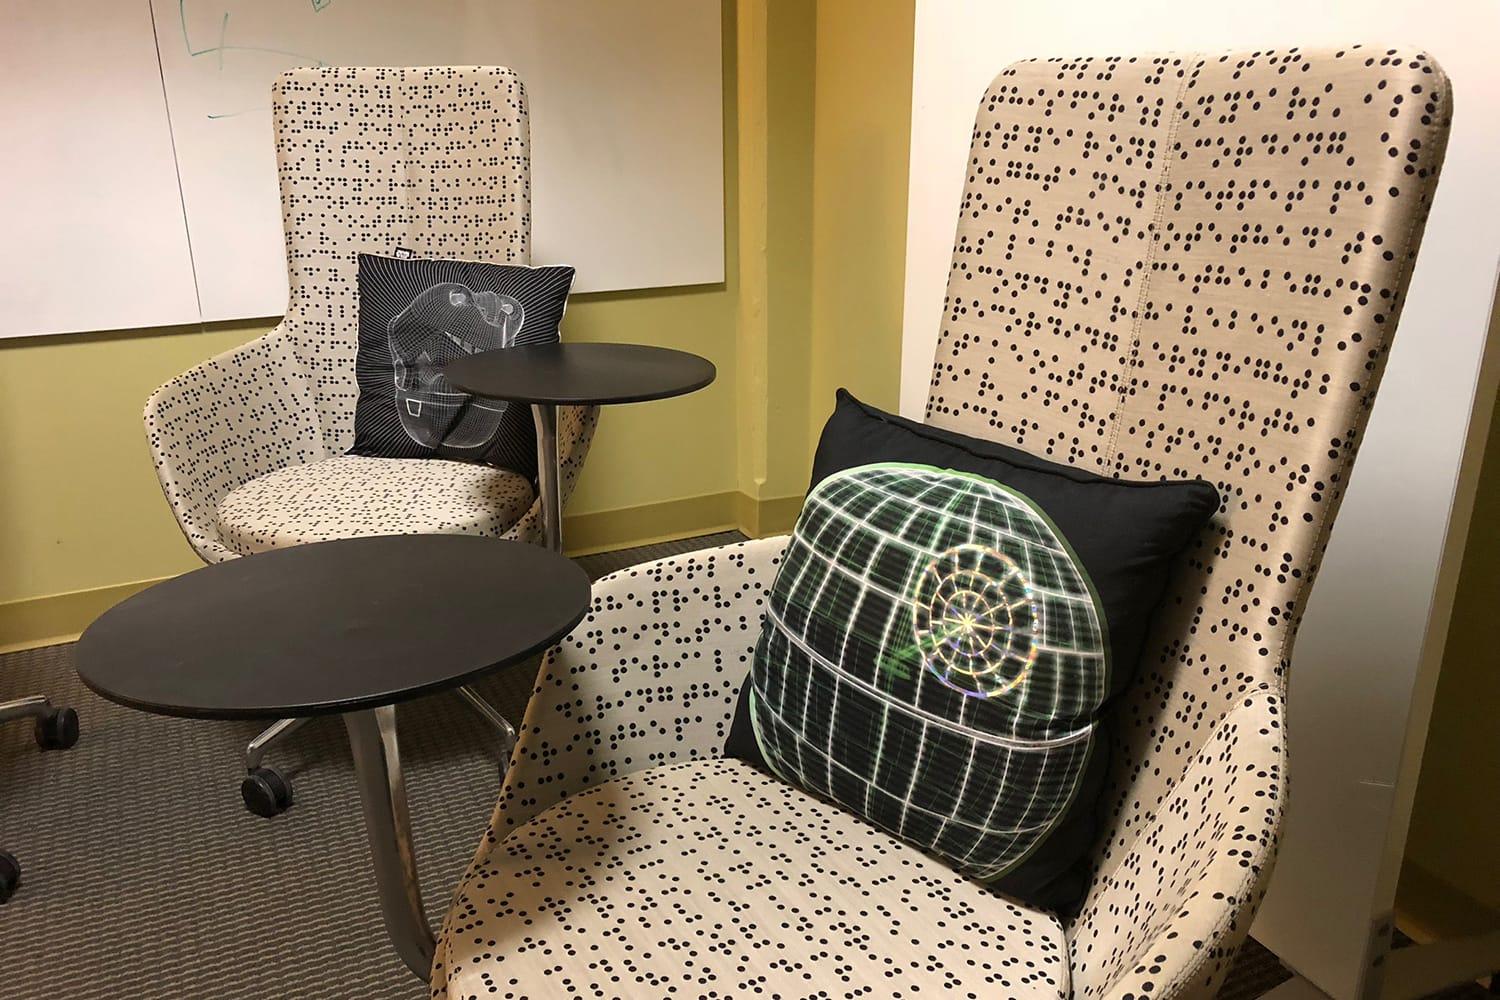 Decorative chairs in the design center